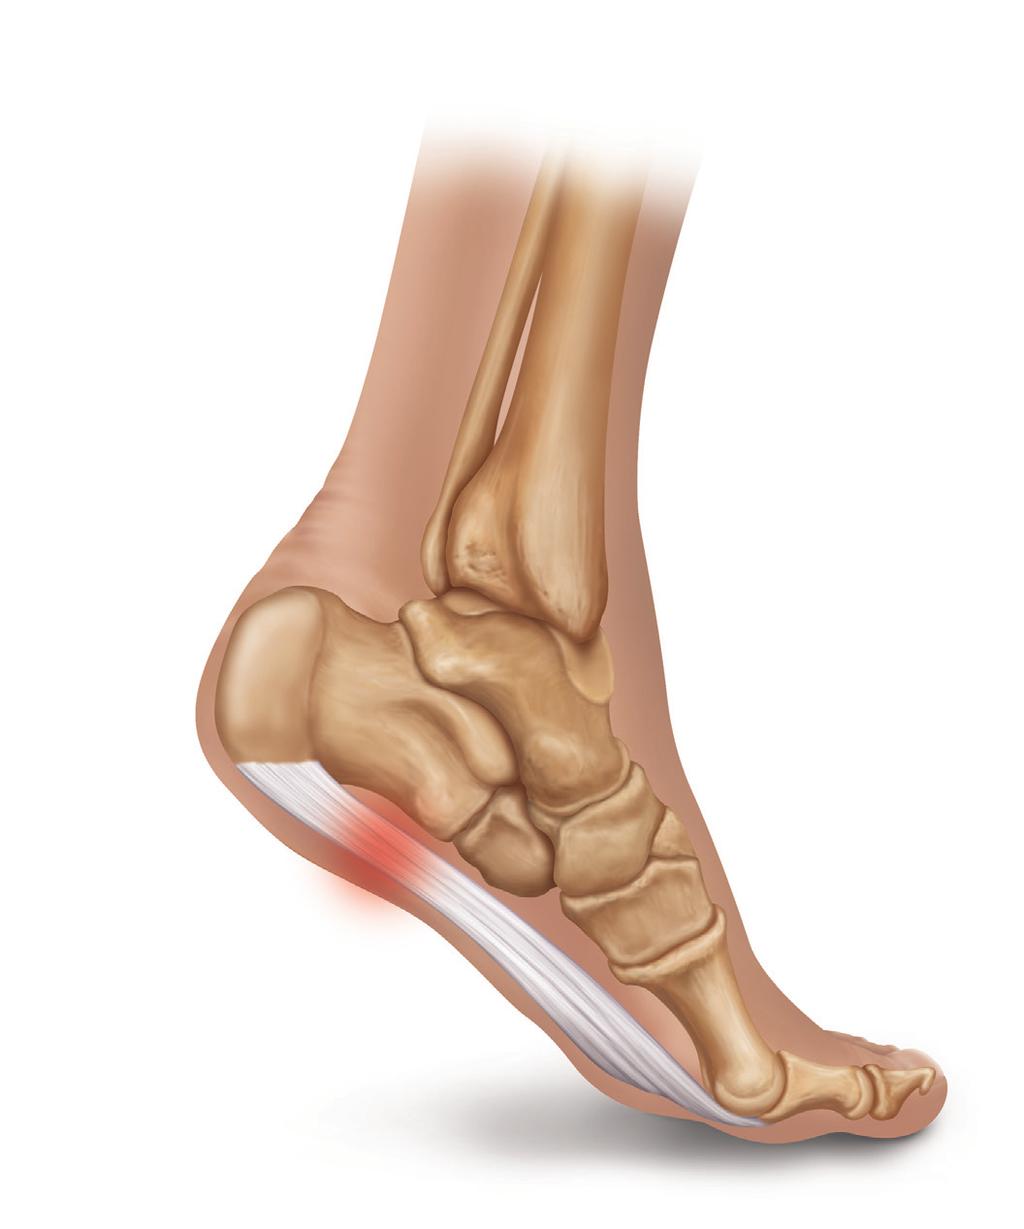 Plantar fasciitis is the most common cause of heel pain for which professional care is sought.